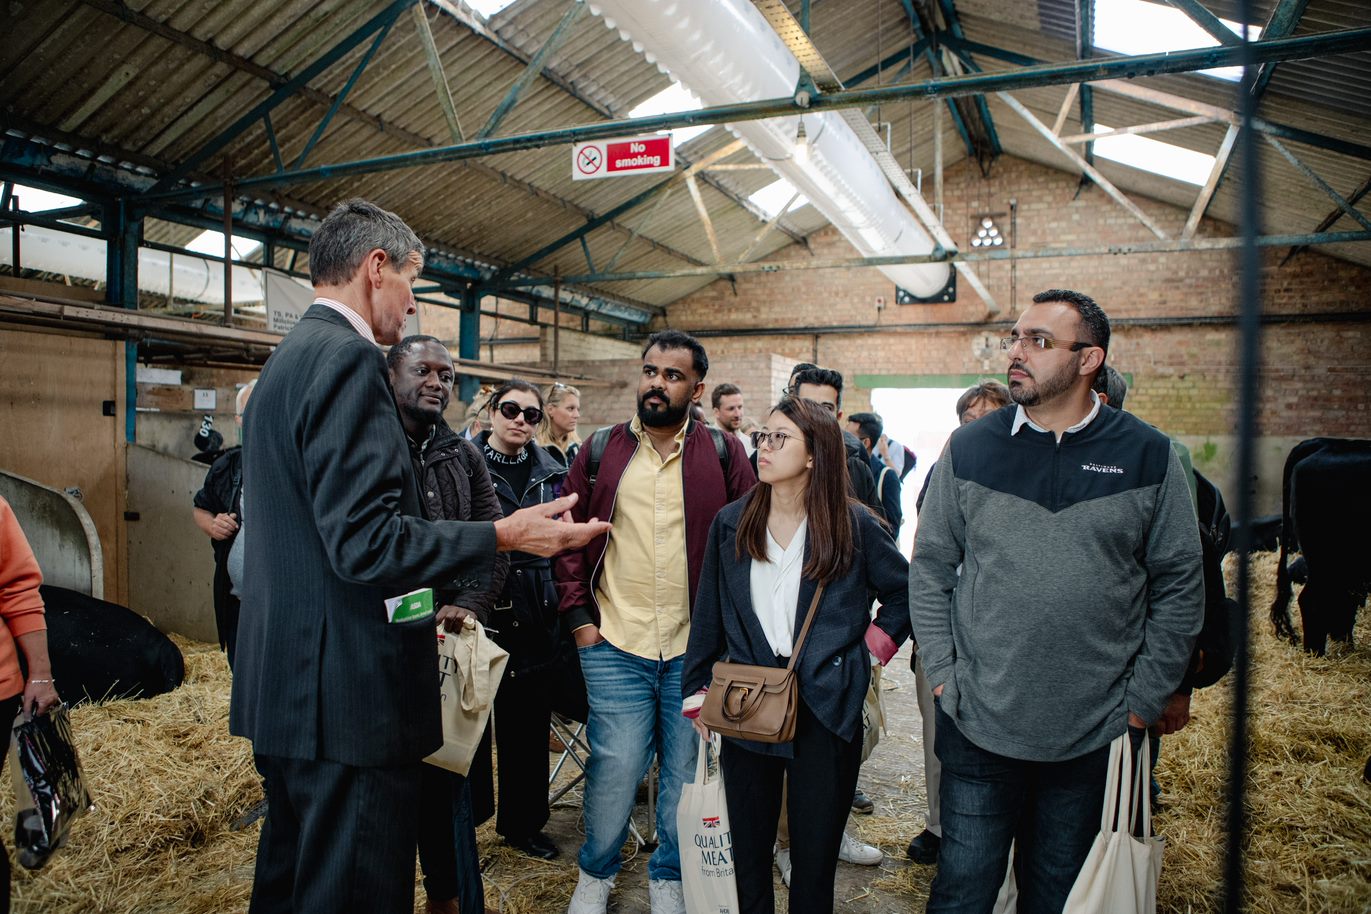 Group of people being shown around a cow shed on farm